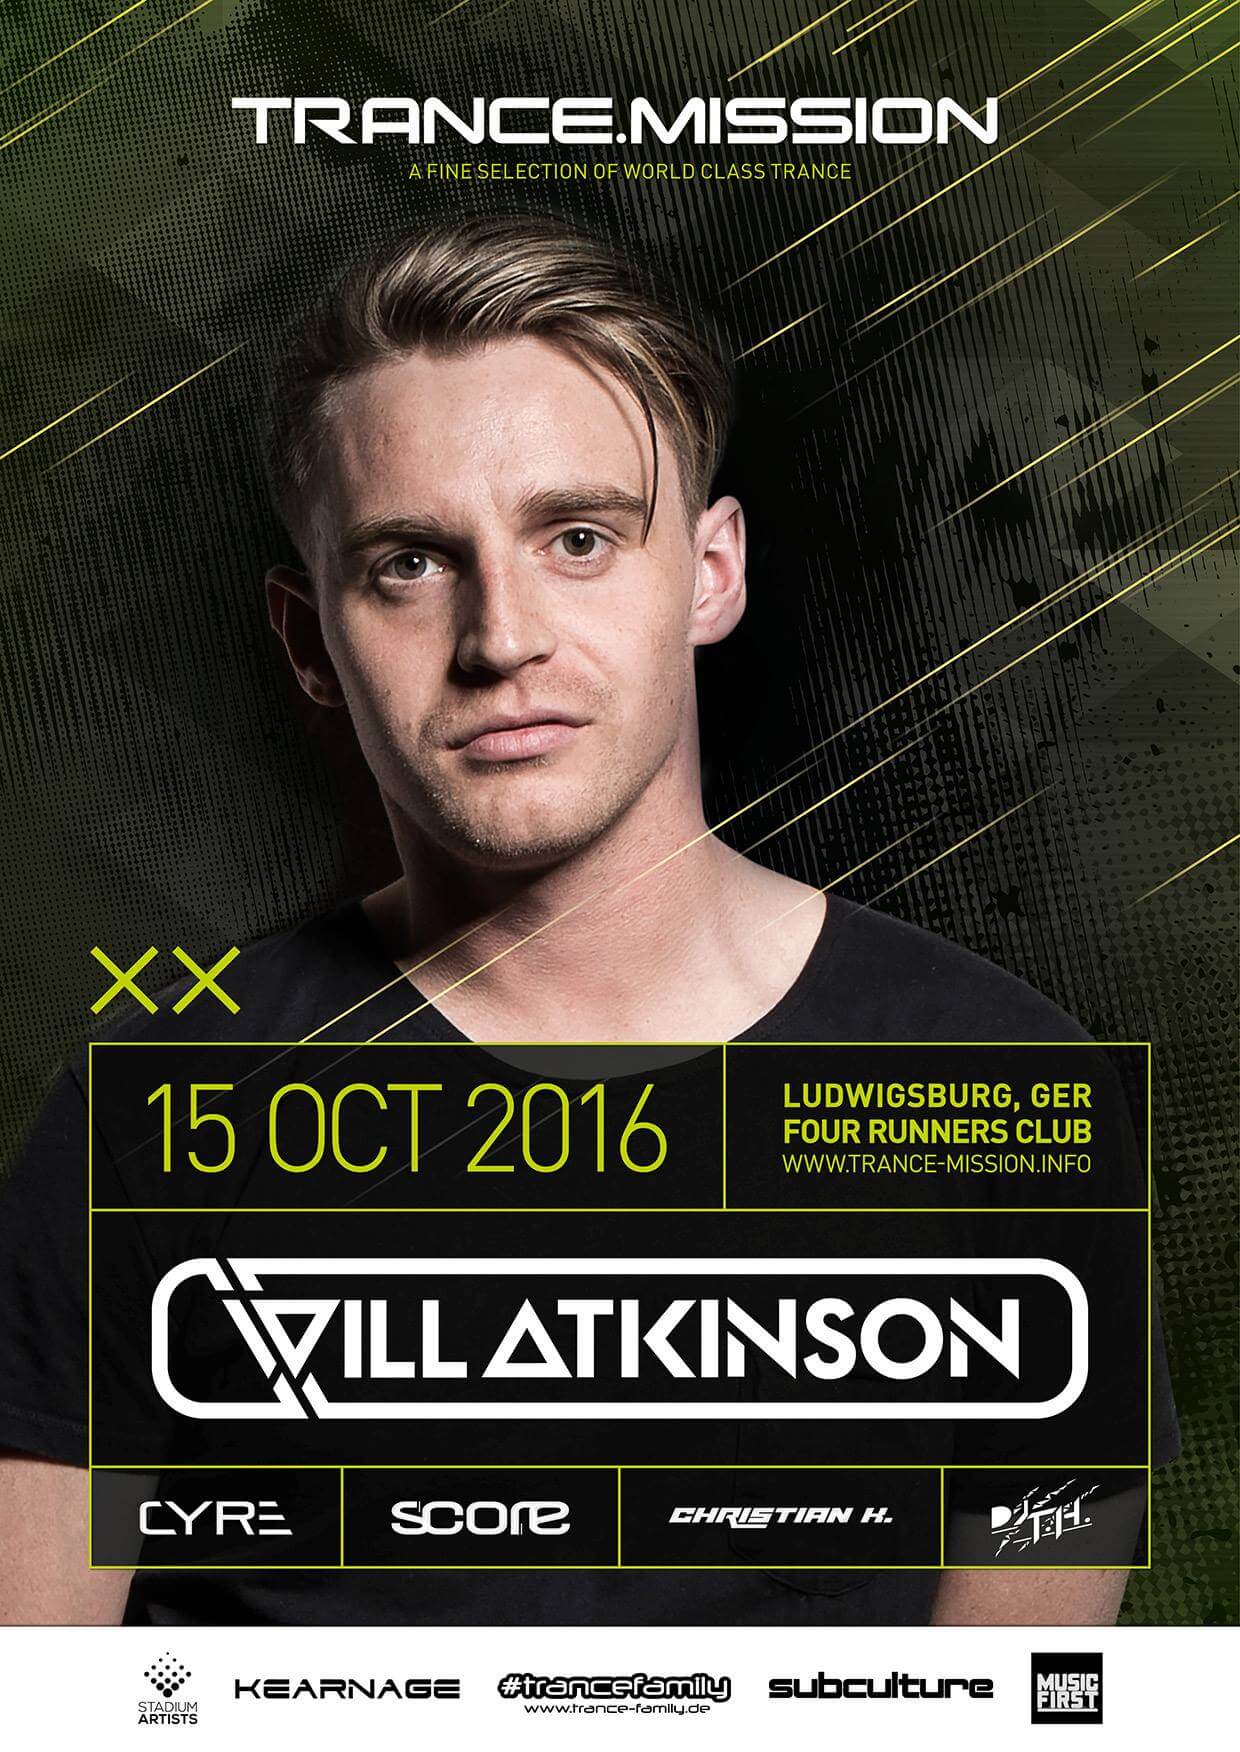 Trance.Mission presents Will Atkinson at Four Runners Club, Ludwigsburg, Stuttgart, Germany on 15th of October 2016 flyer